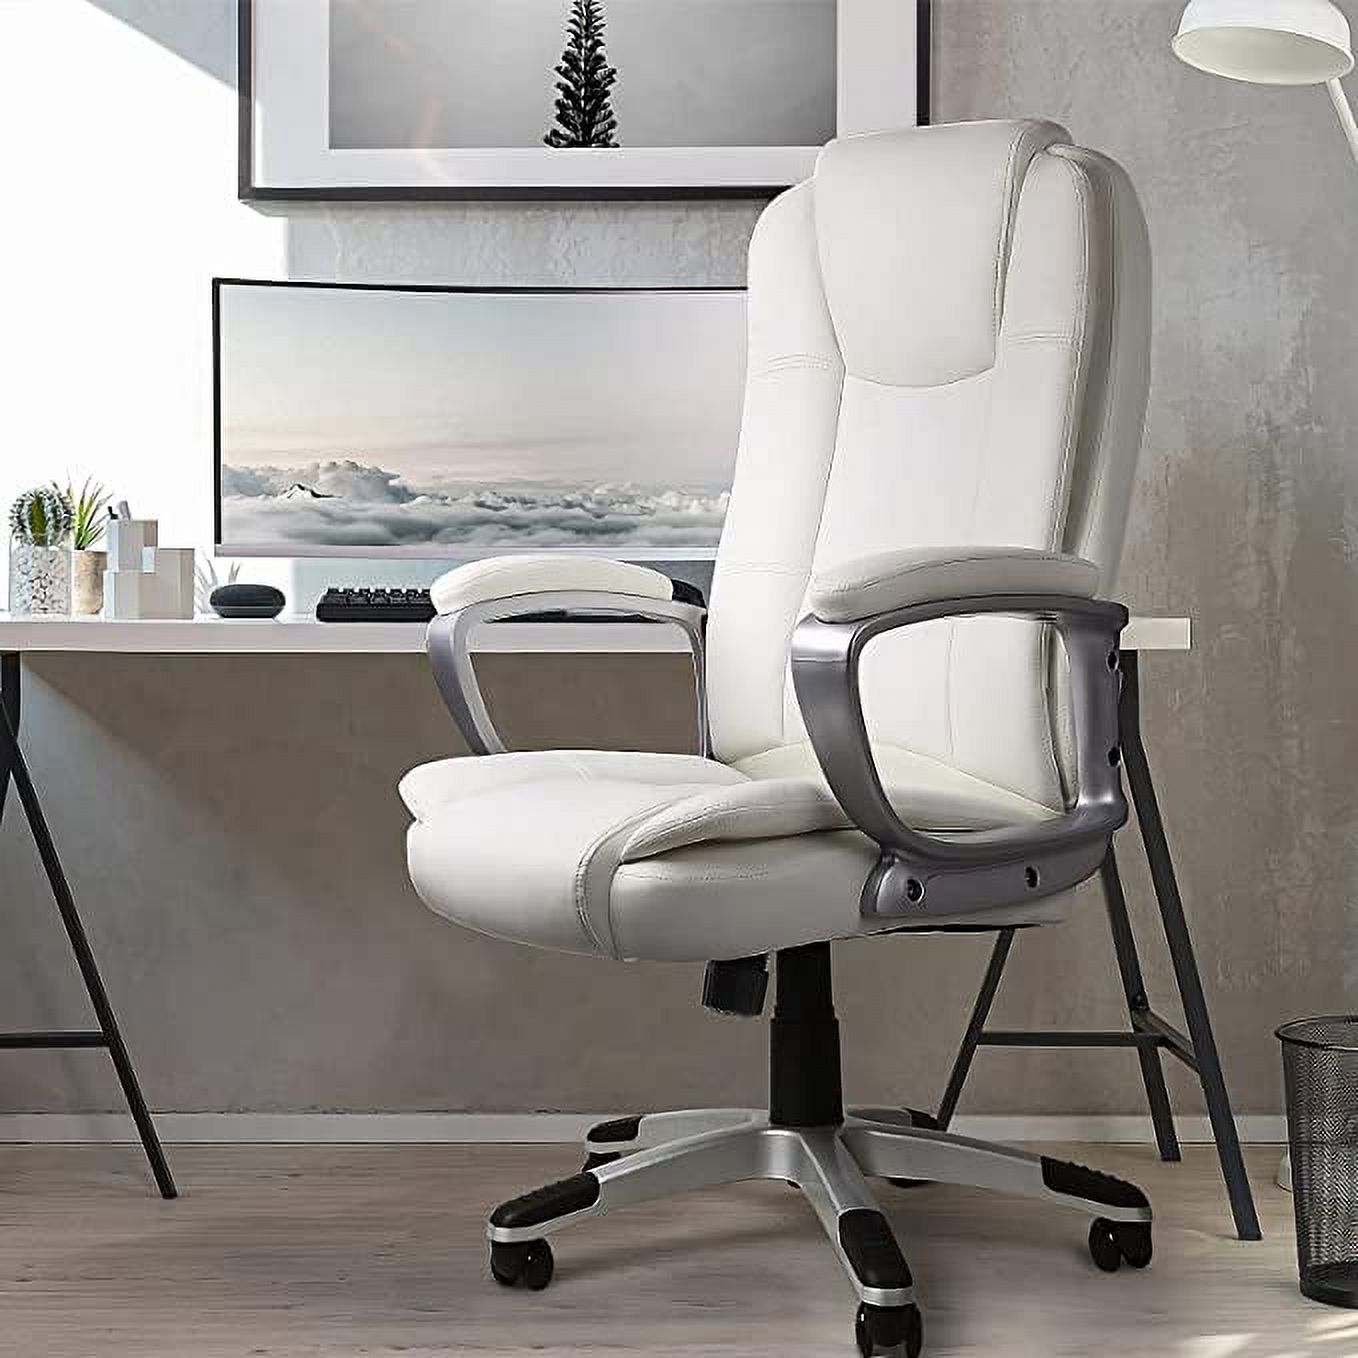 Home Office Chair, Comfortable Heavy Duty Design, Ergonomic High Back Cushion Lumbar Back Support, Computer Desk Chair, Big and Tall Chair, Adjustable Executive Leather Chair with Arms (White) - image 5 of 7